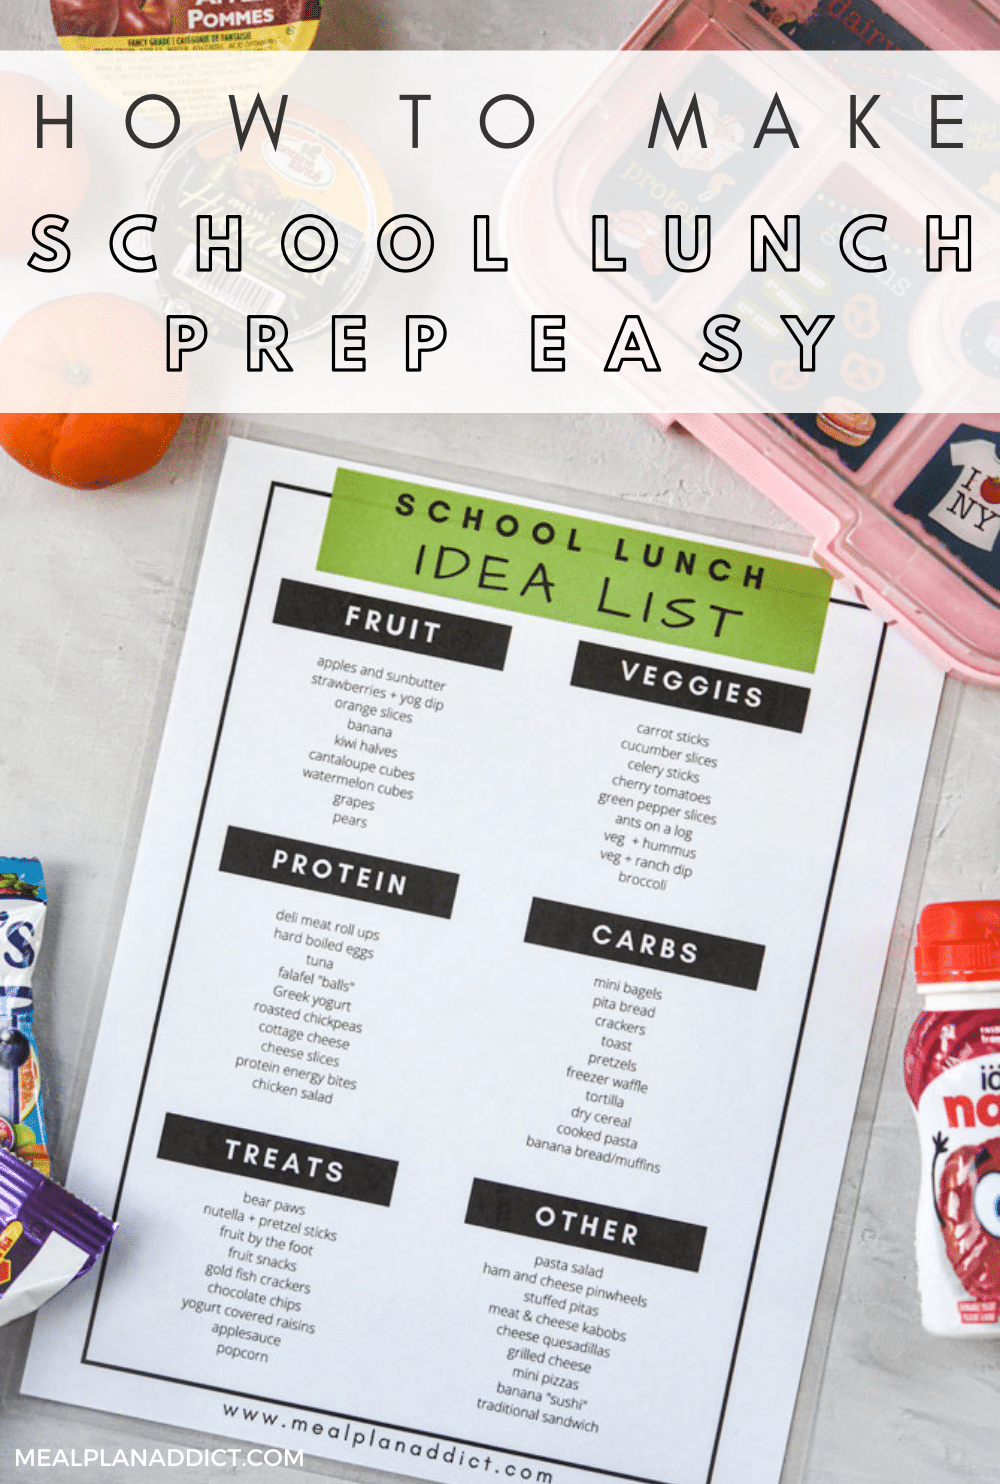 School lunch meal prep pin for Pinterest